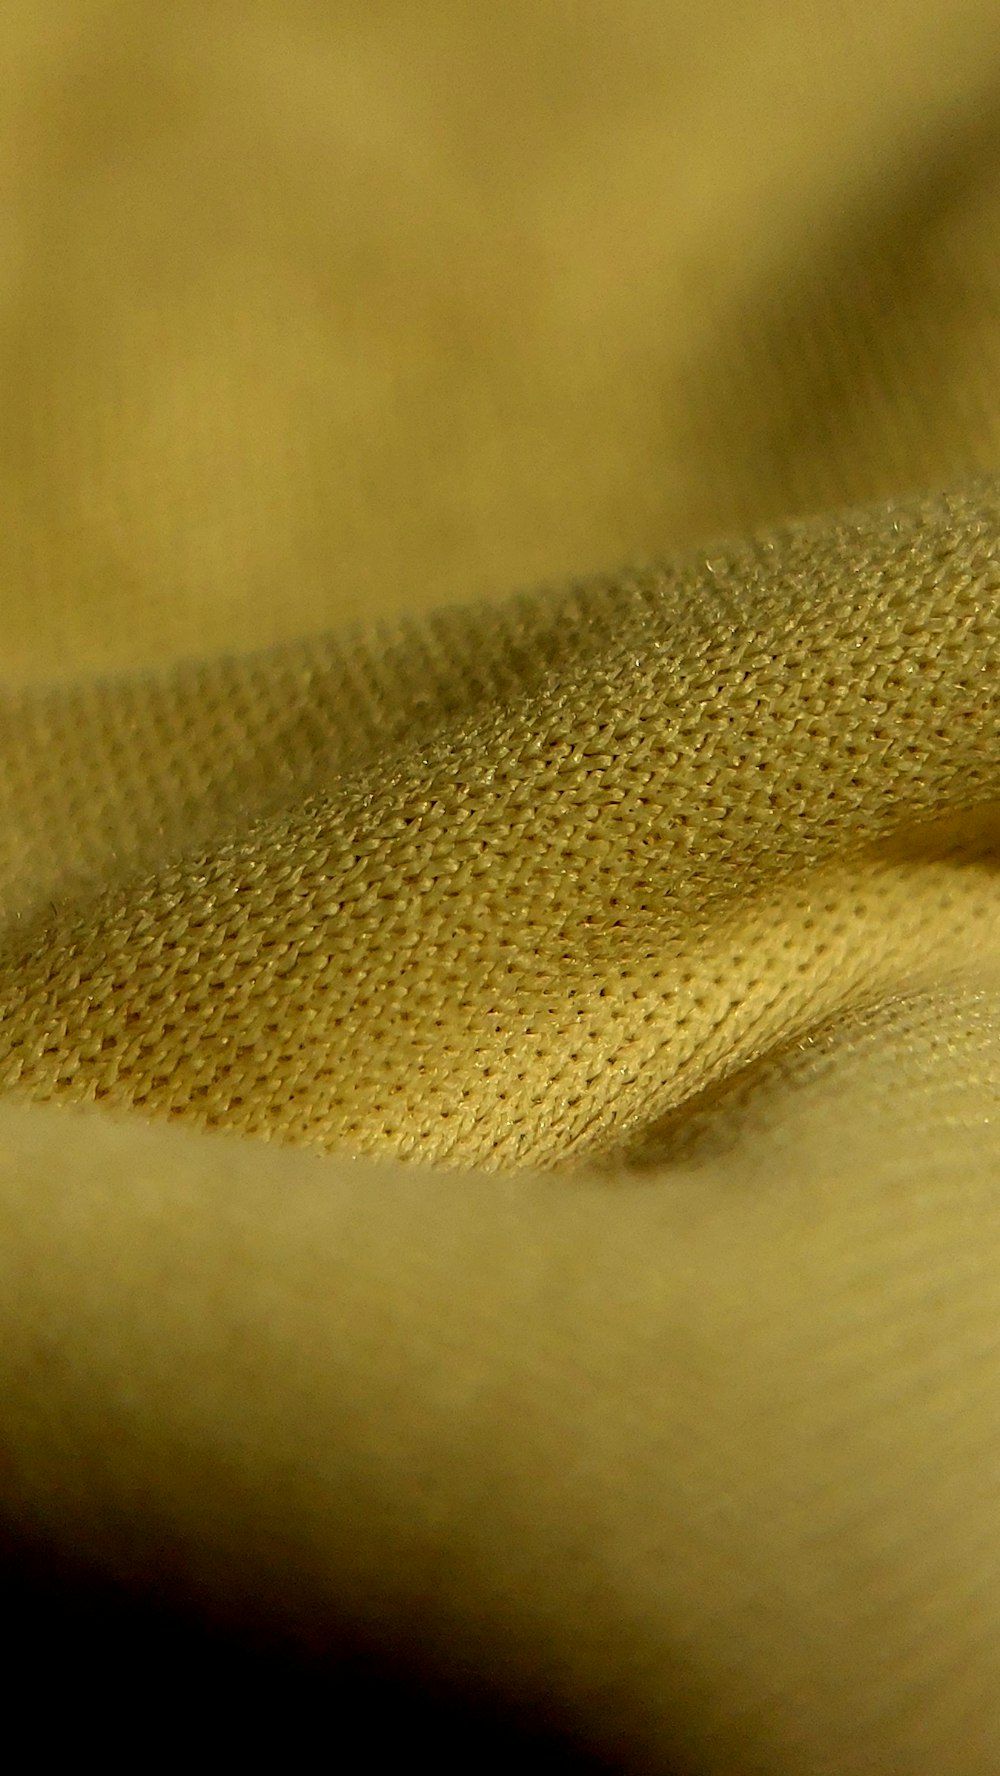 a close up view of a yellow cloth